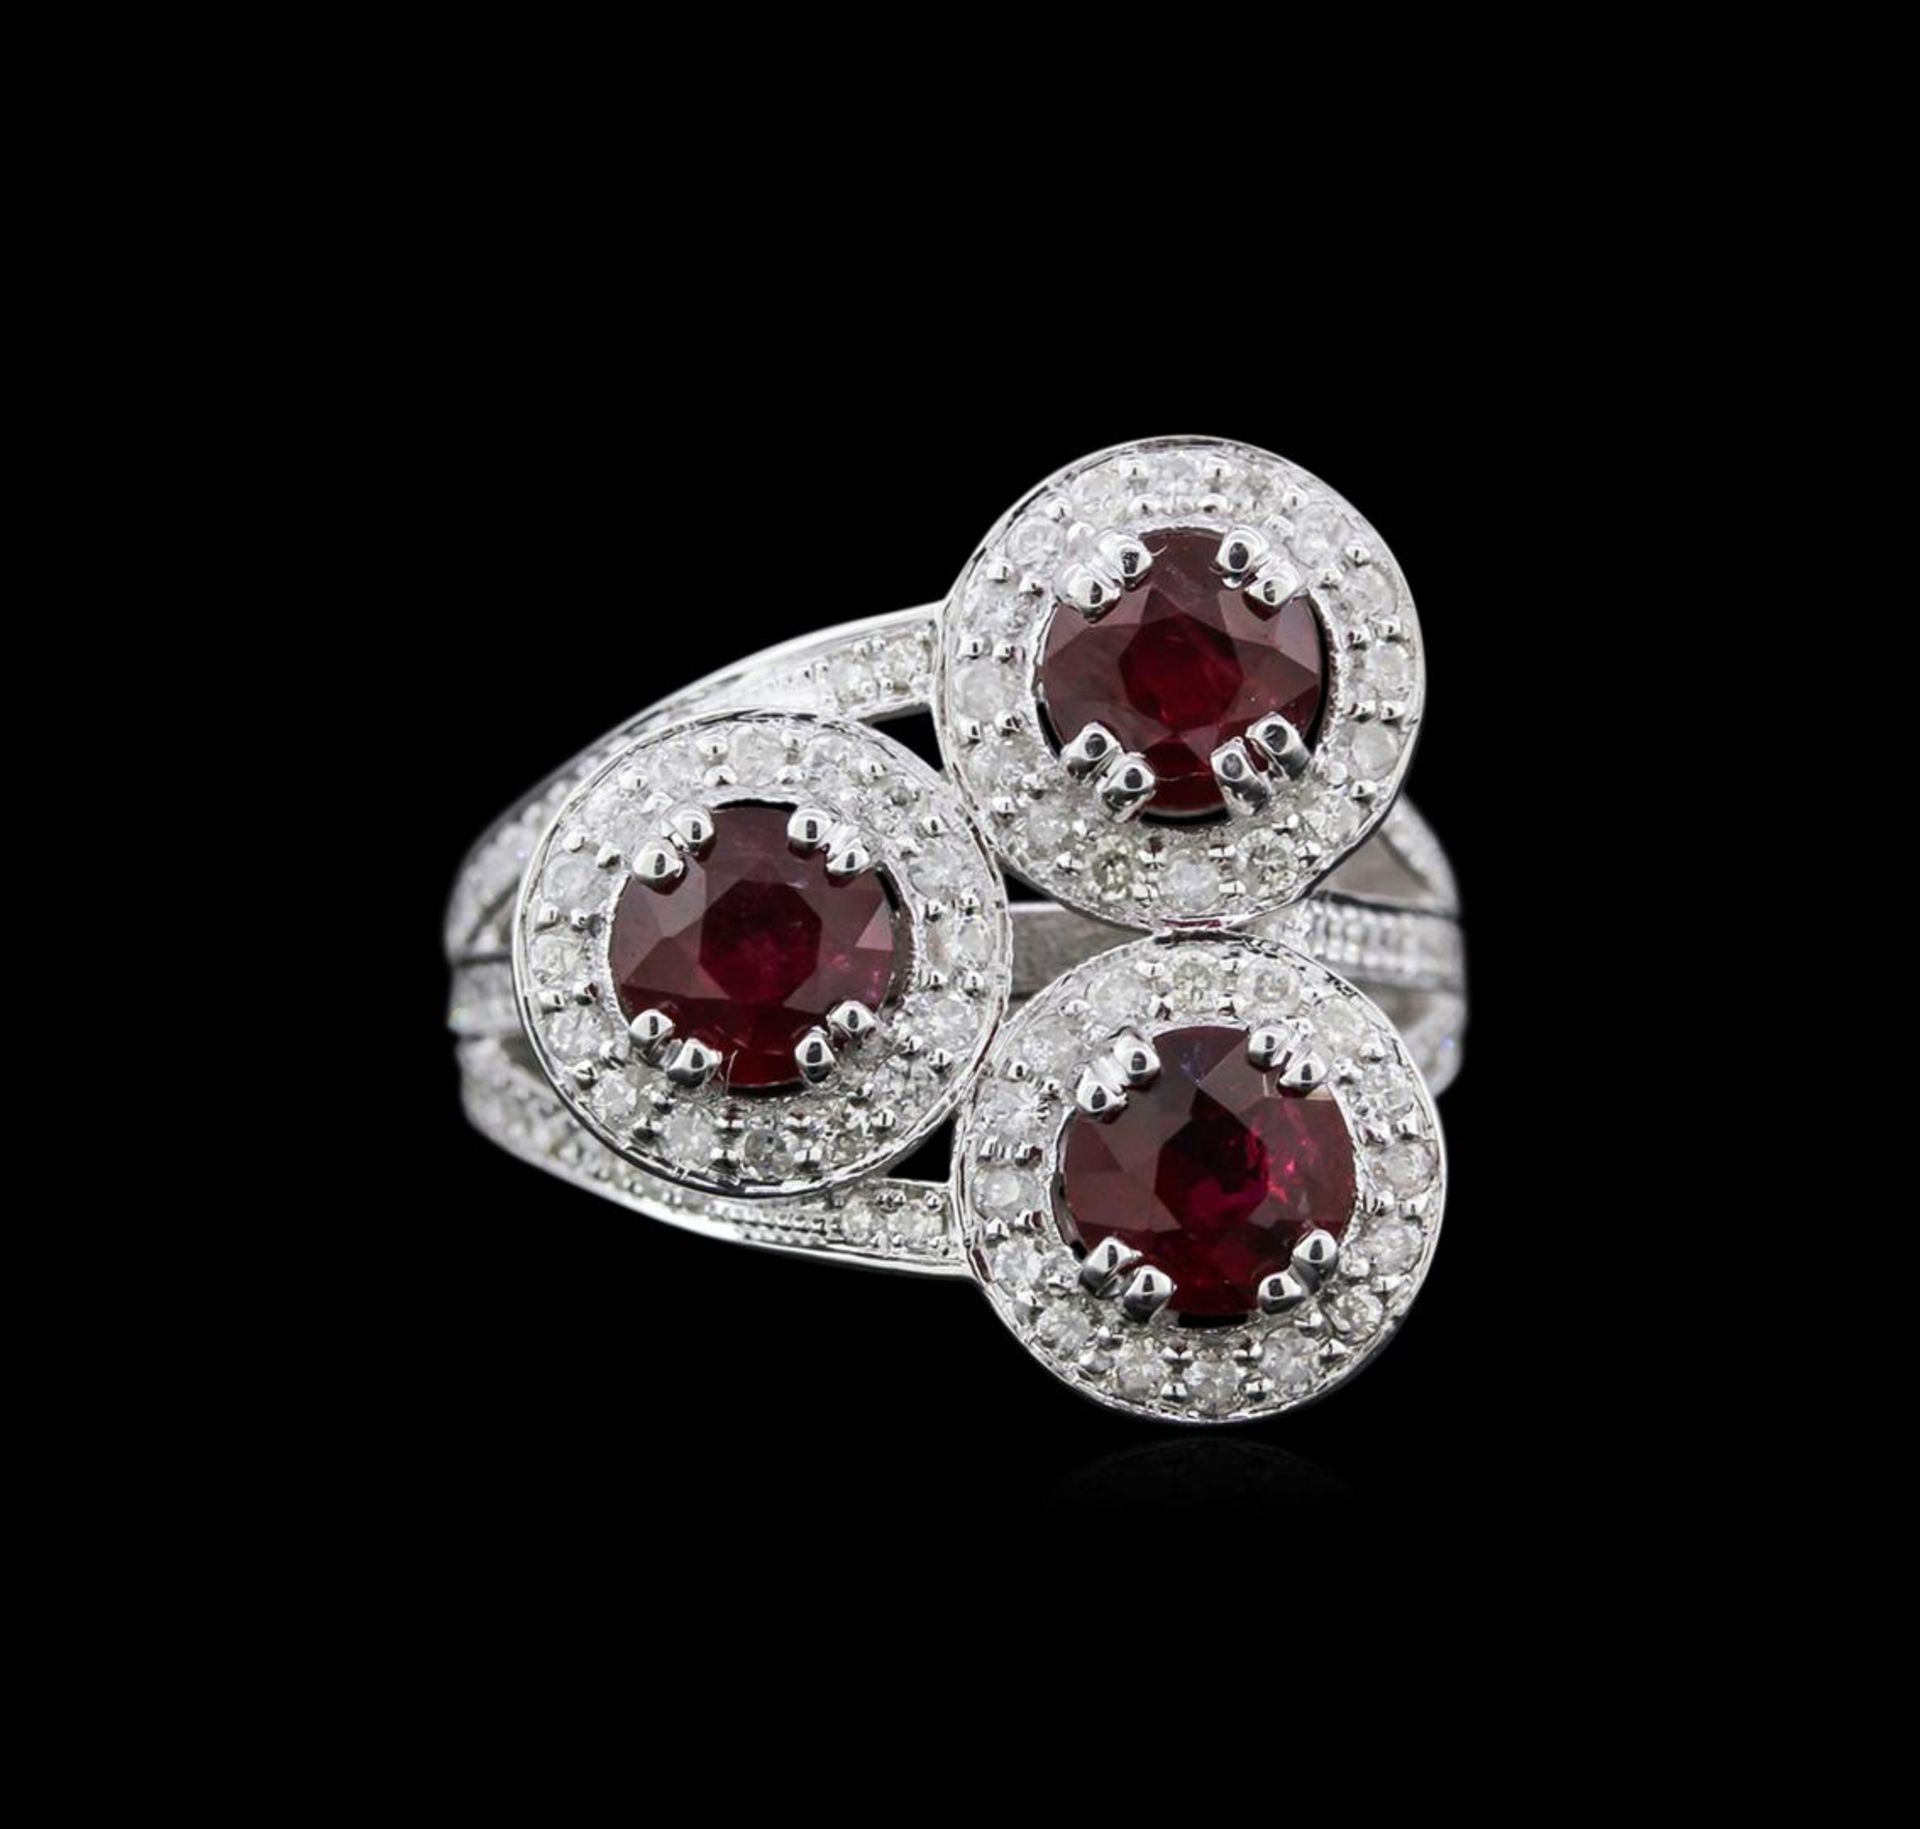 2.64ctw Ruby and Diamond Ring - 14KT White Gold - Image 2 of 4